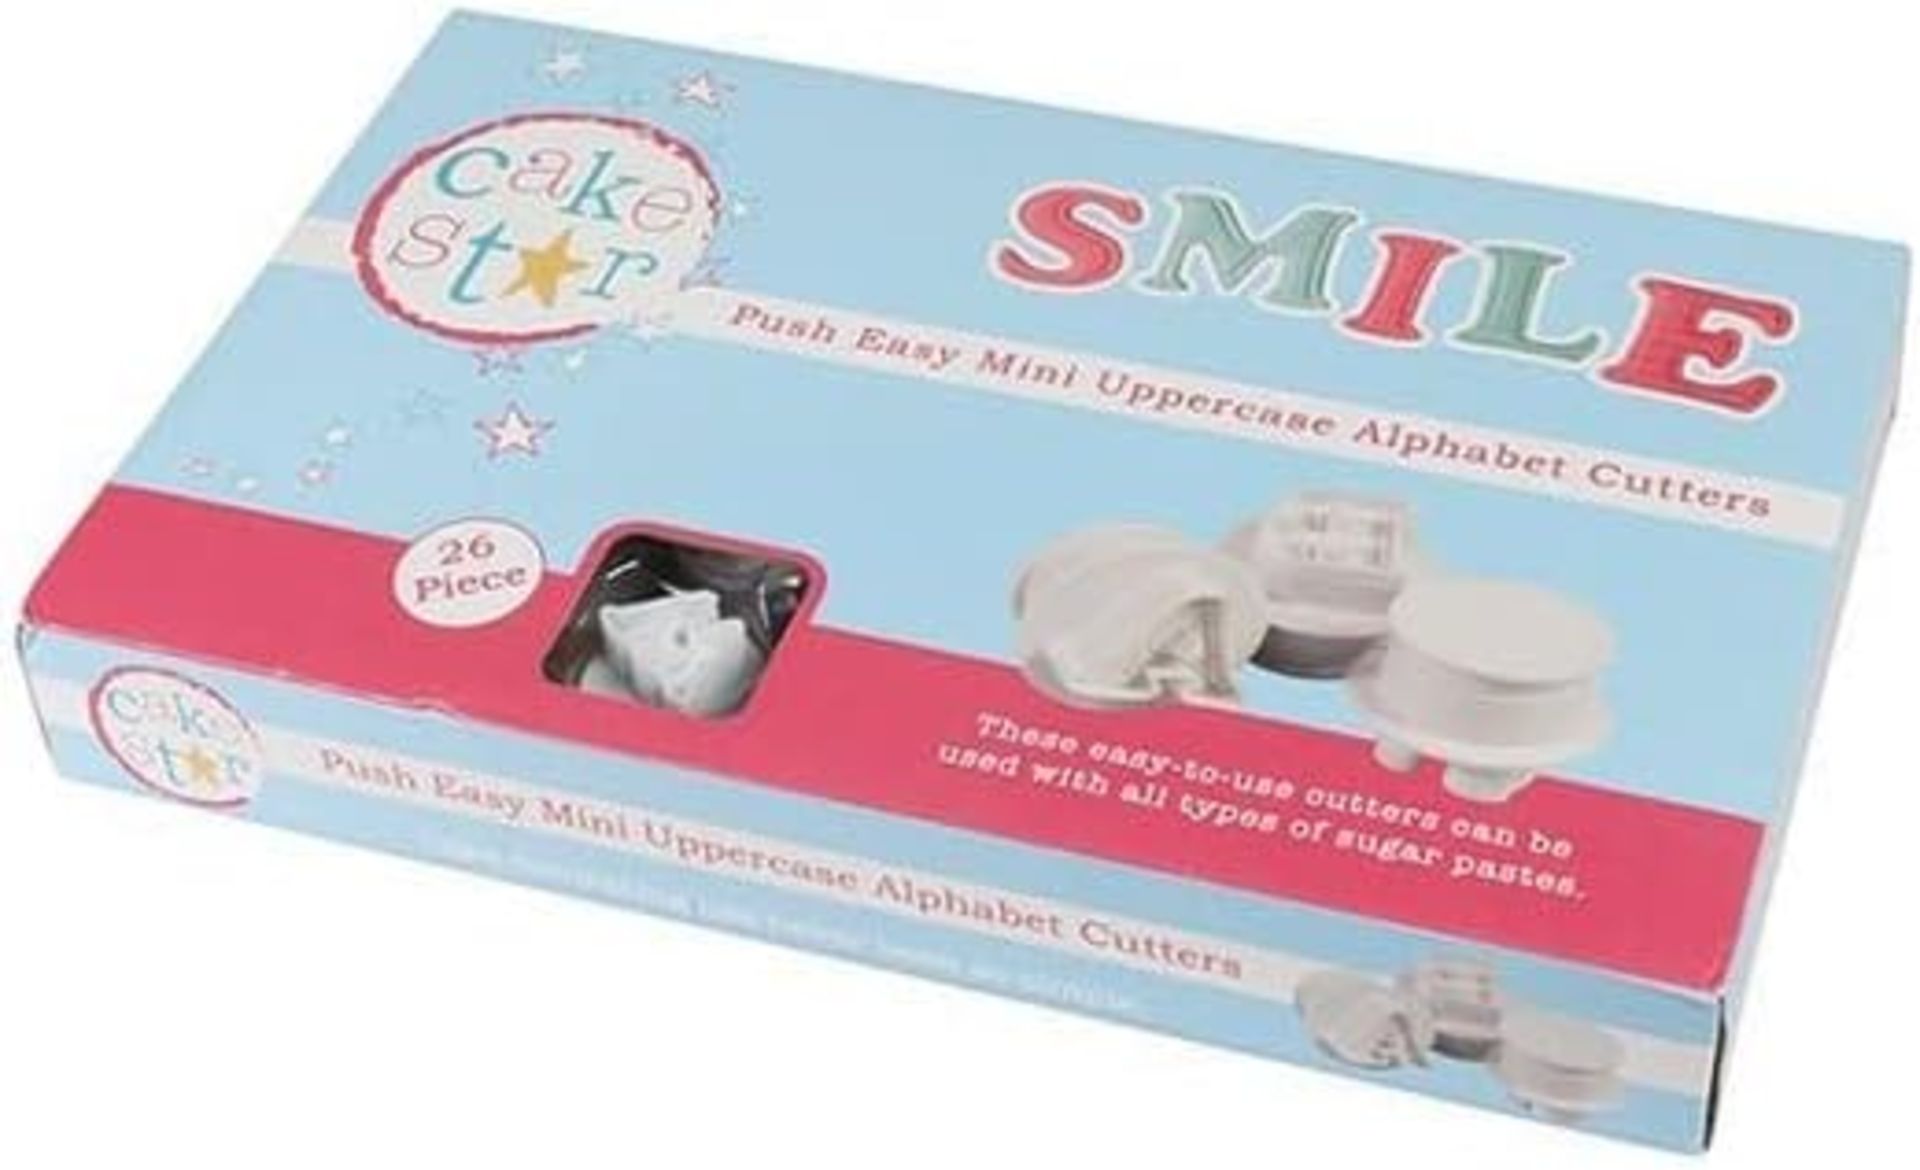 PALLET OF 462 X NEW CAKE STAR PUSH EASY ALPHABET MINI A-Z UPPERCASE - 26 PIECES - £3500